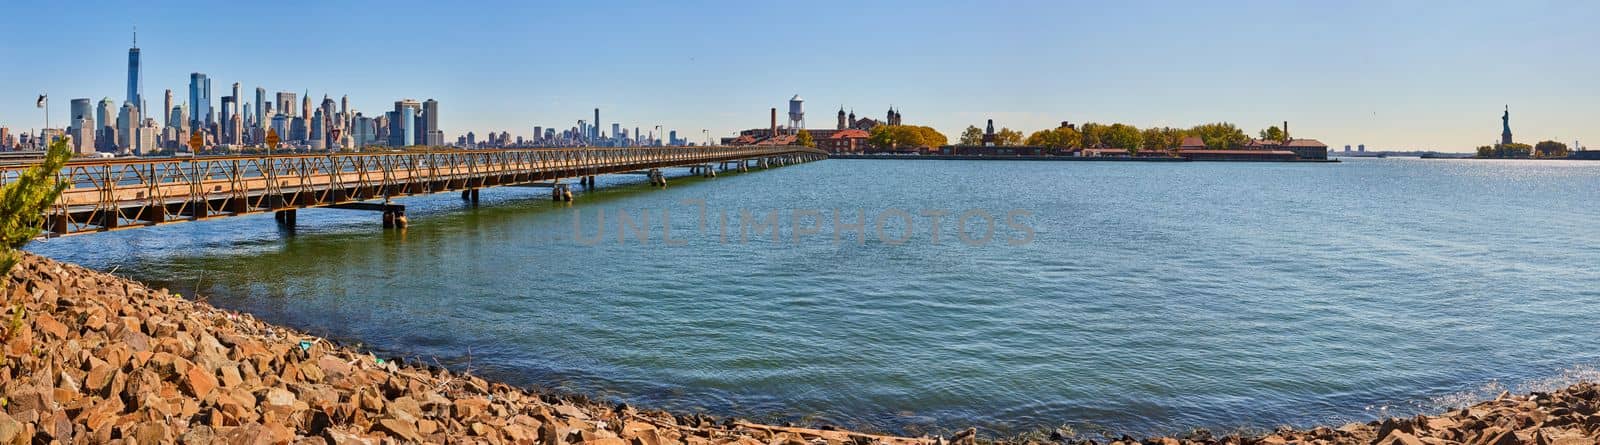 Panoramic view from New Jersey coast of Ellis Island, Statue of Liberty, and New York City skyline in distance by njproductions